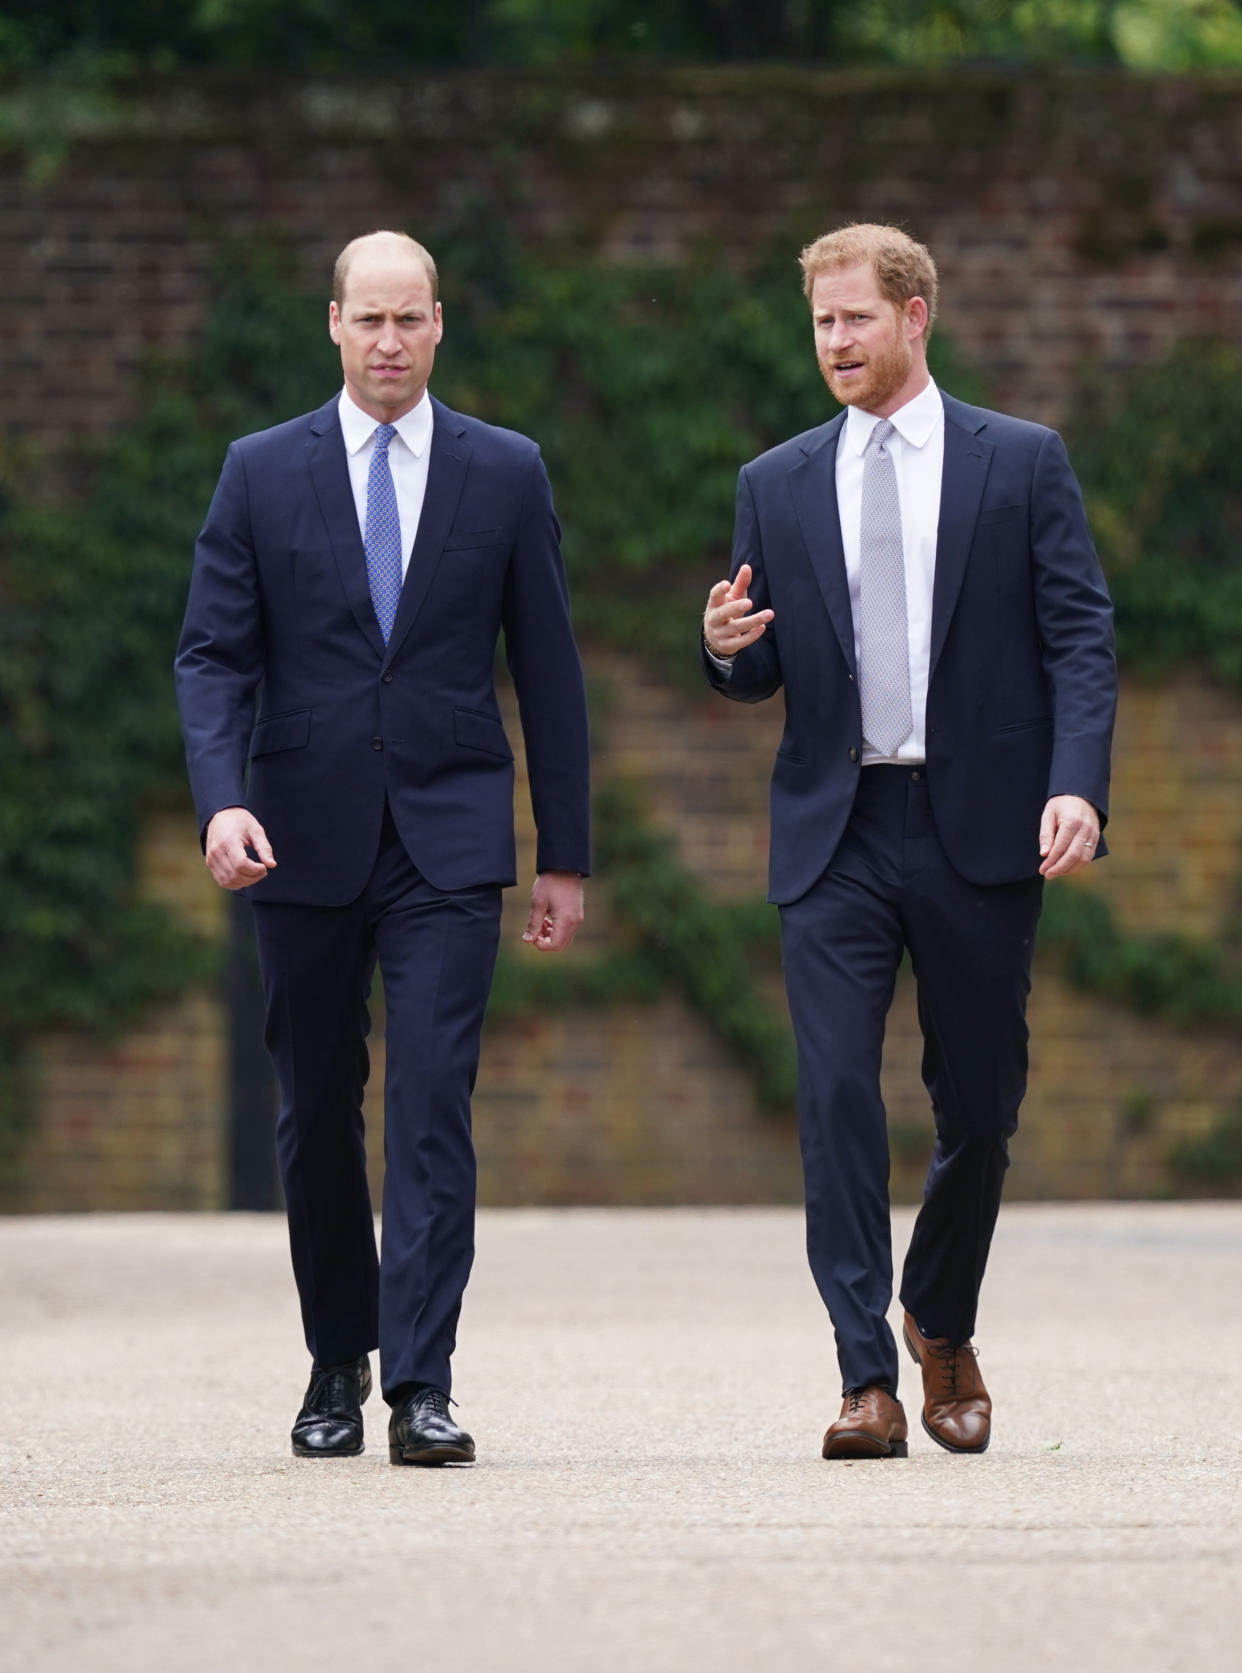 The Duke of Cambridge and Duke of Sussex were in conversation as they walked together to the garden. (Photo: PA Images)